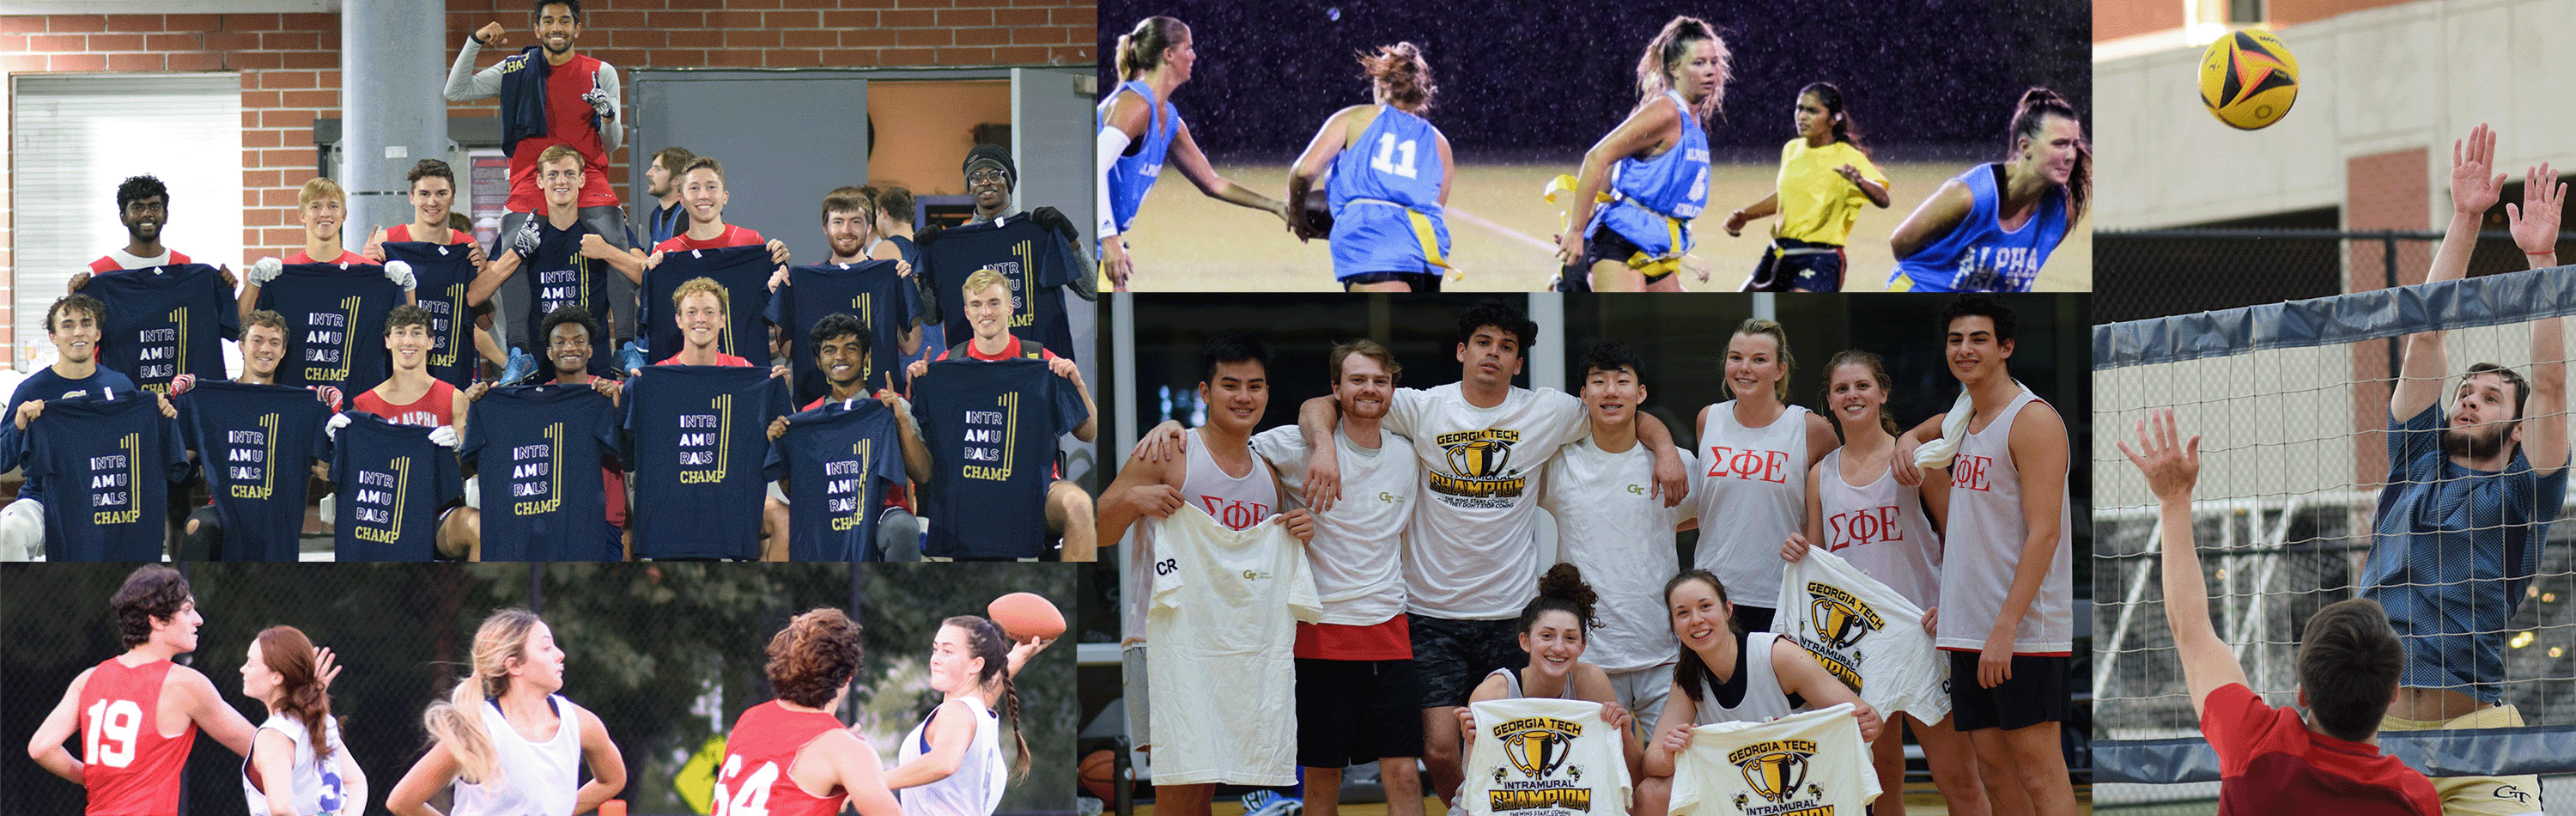 Collage of GT students playing or representing different intramural sports.